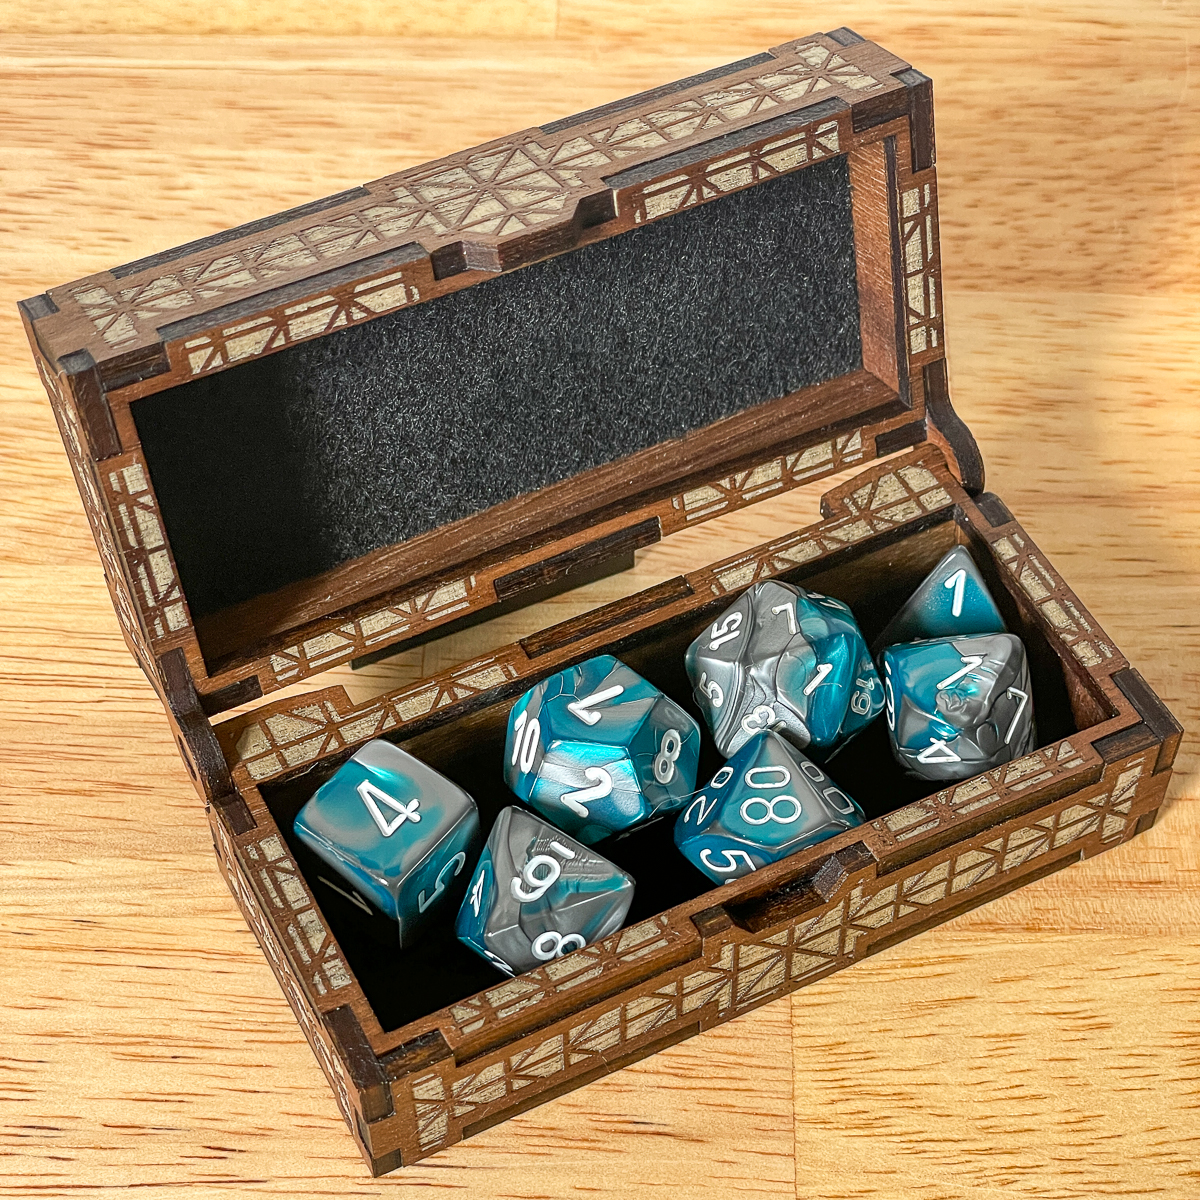 DIY dice box with blue and gray dungeons and dragons dice set inside